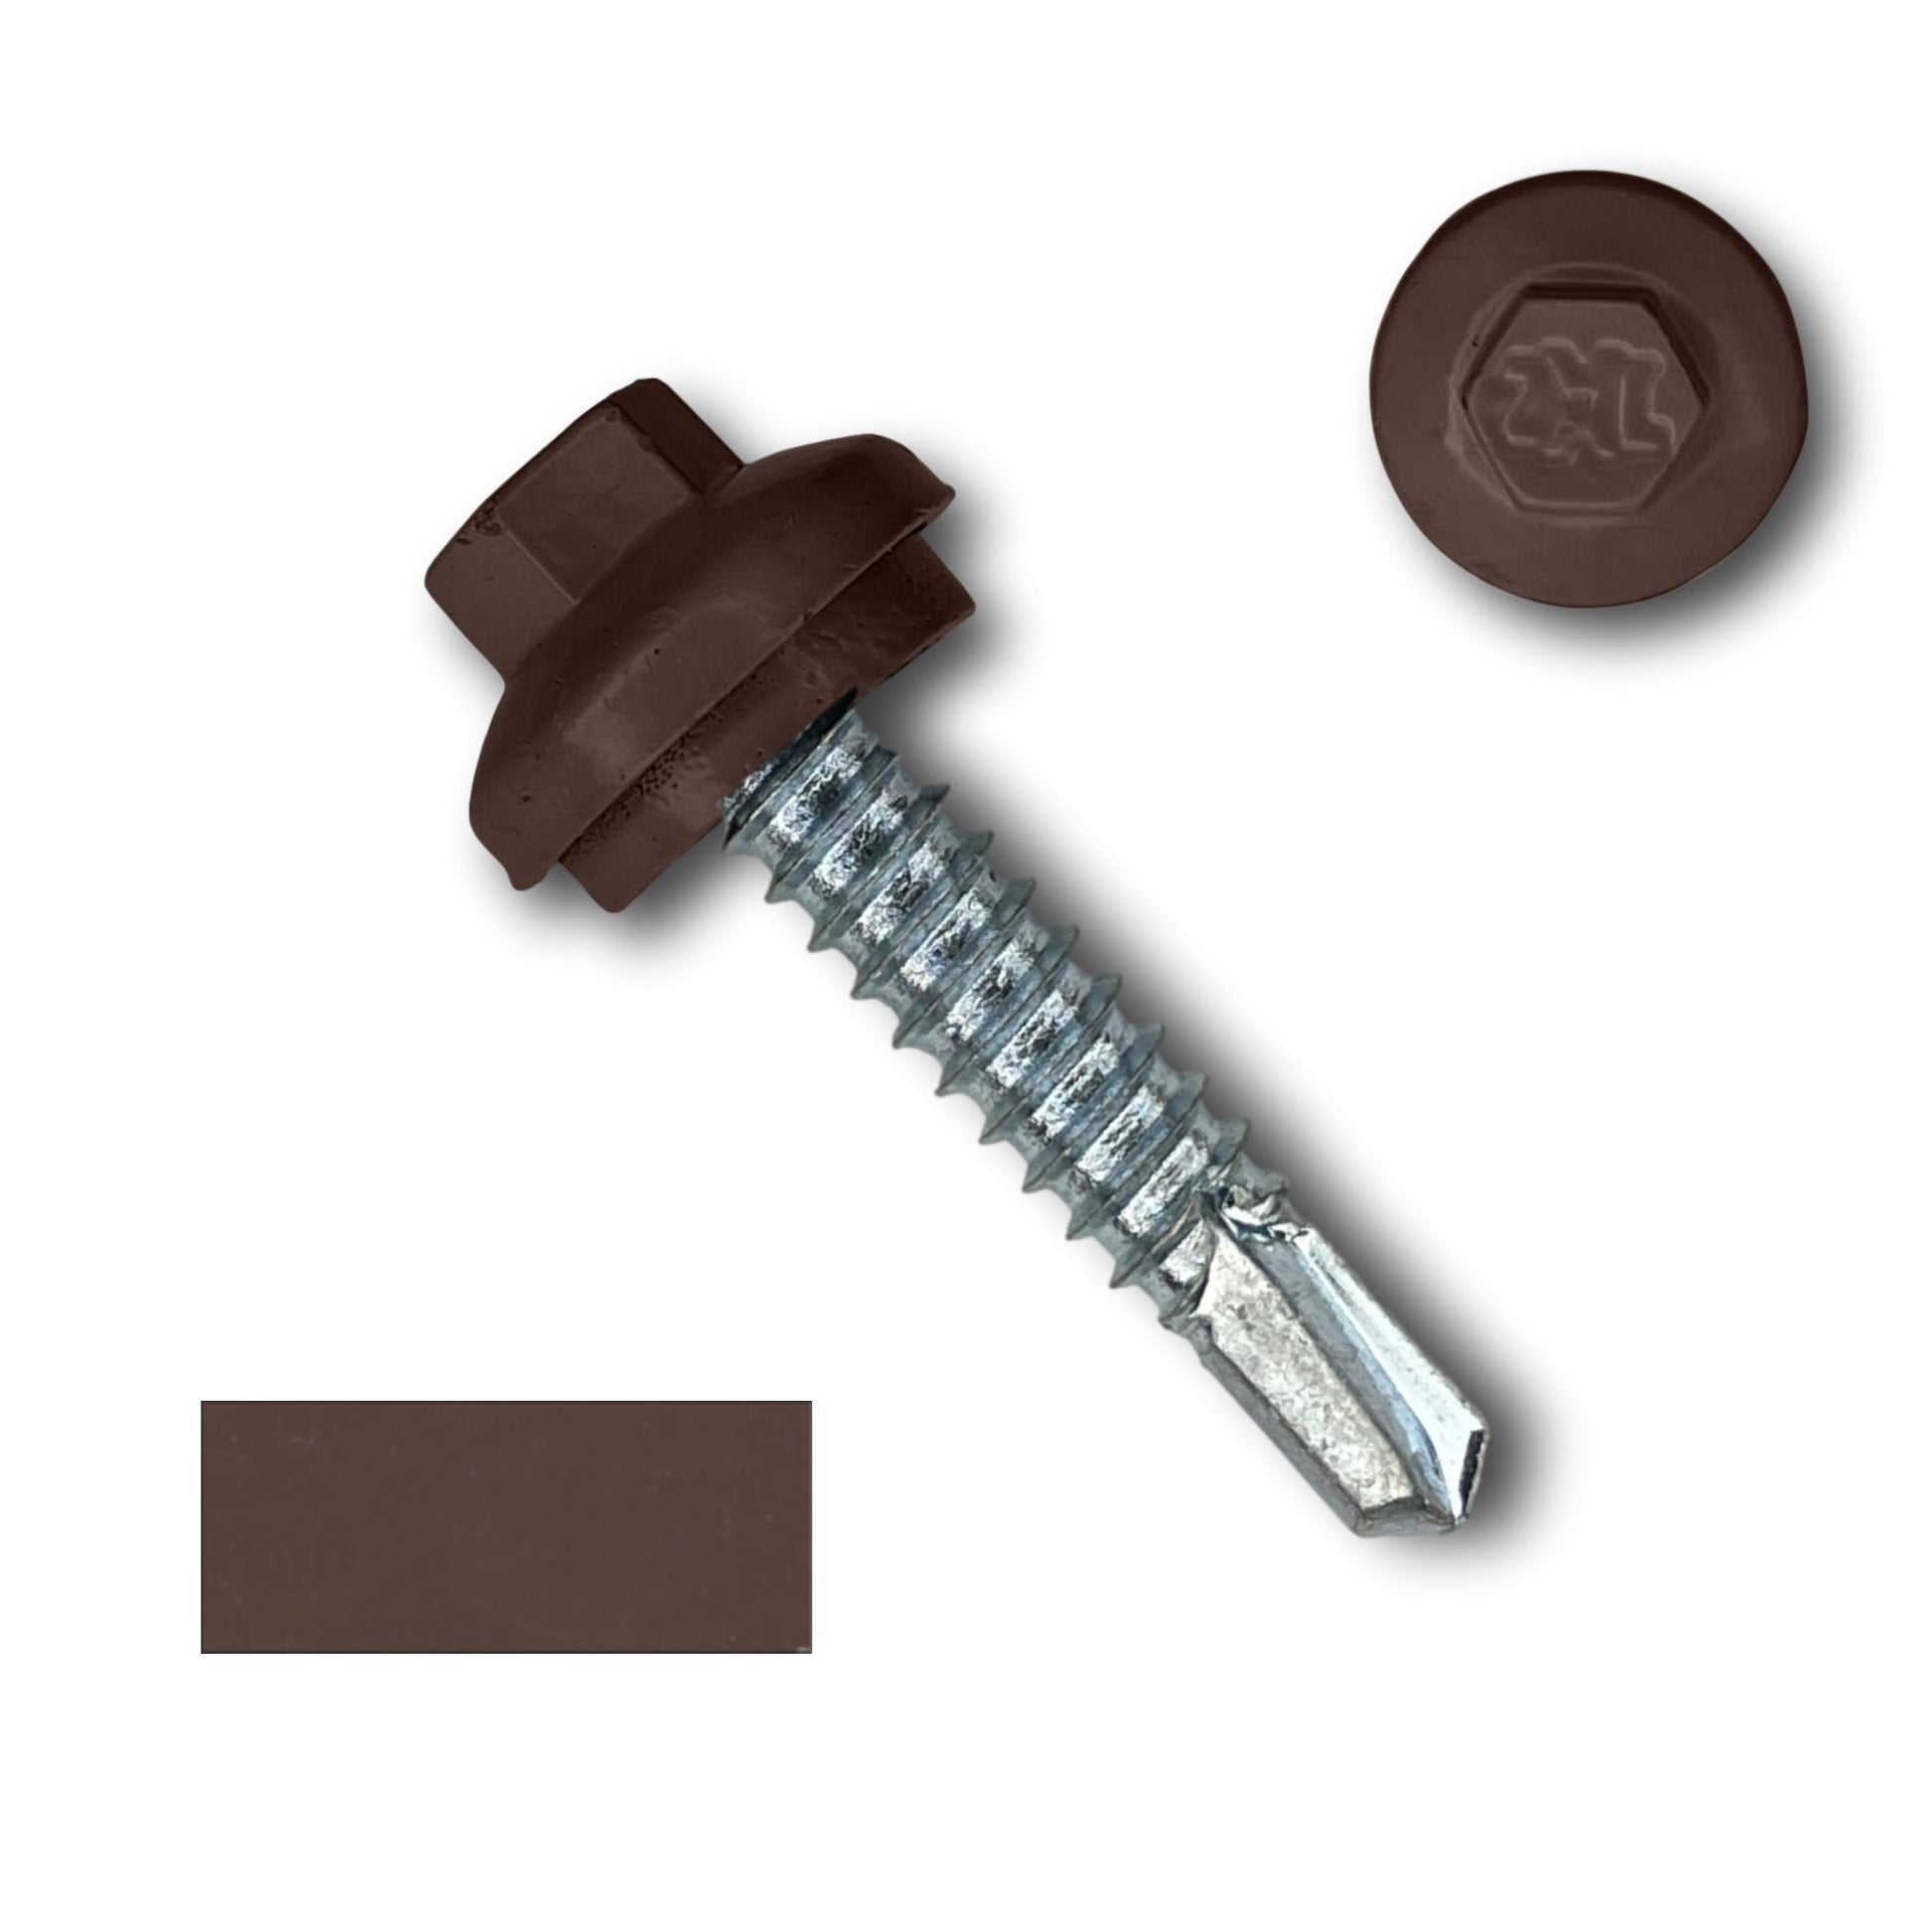 A #14 x 1.25" ZXL Dome Cap Metal Building Screws (Metal-to-Metal), Self-Drilling - 250, 500, or 1000 Pack by Perma Cover with a matching ZXL Dome Cap and a brown rectangular color swatch. The metallic threads on the screw are silver, contrasting with the brown head and cap, making it ideal for metal building screws applications.